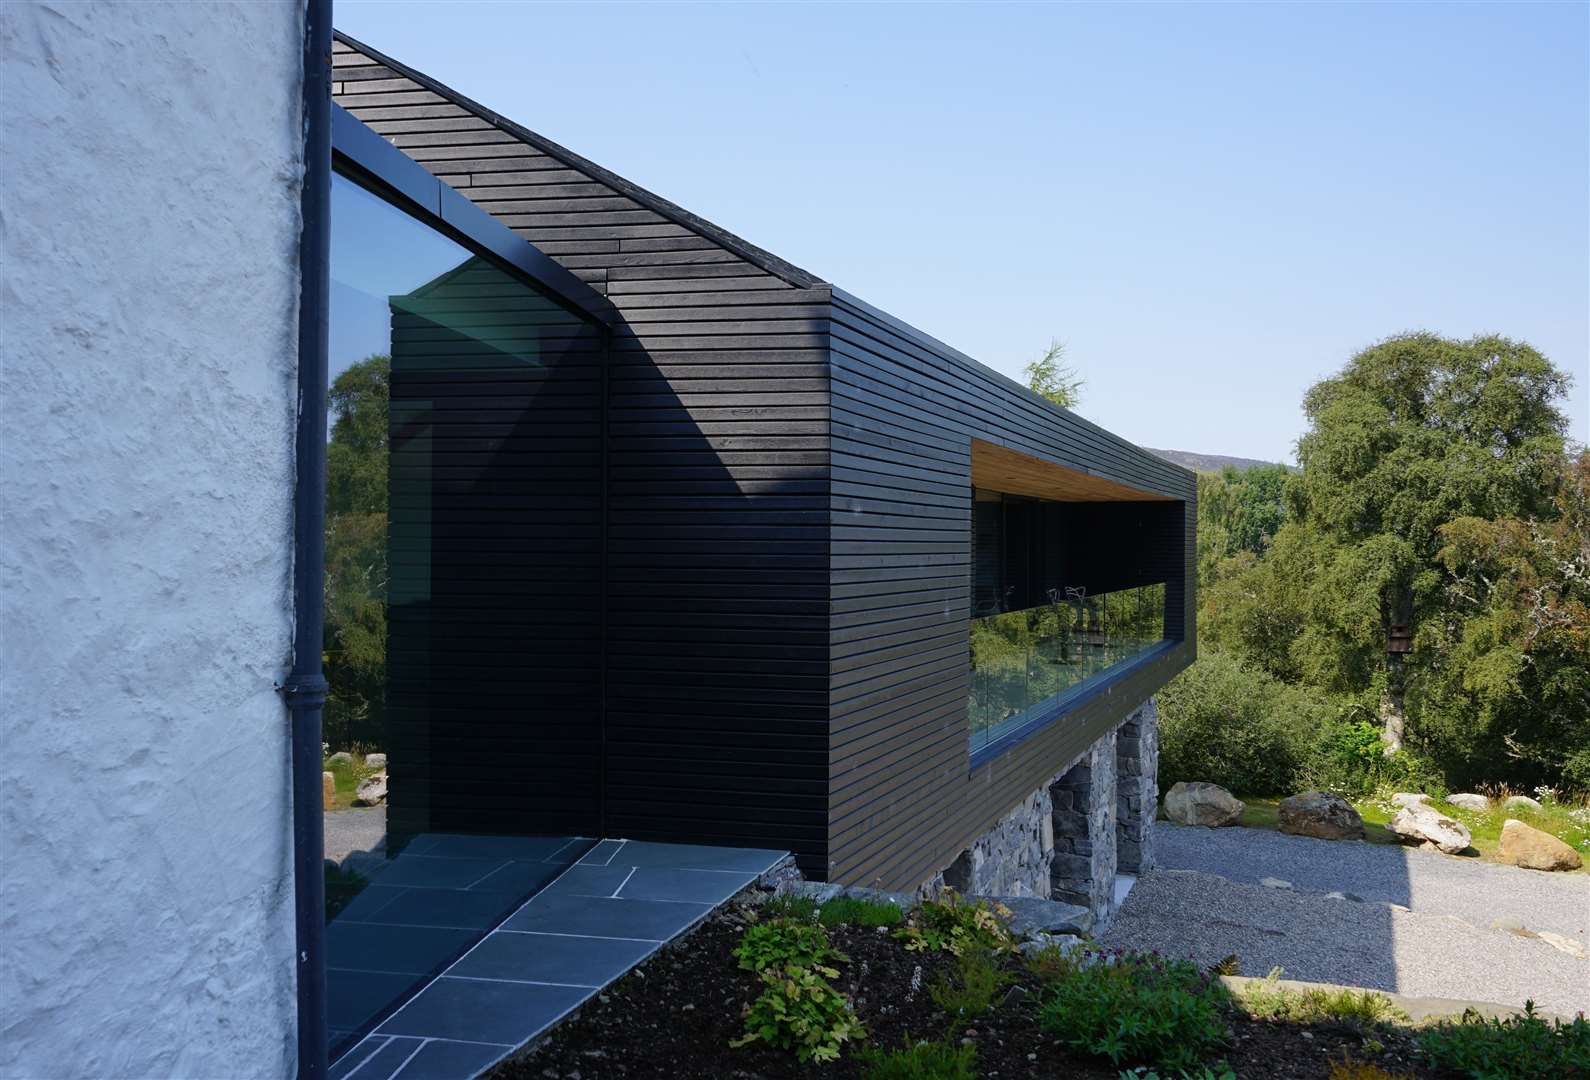 An eye-catching design in the strath countryside.